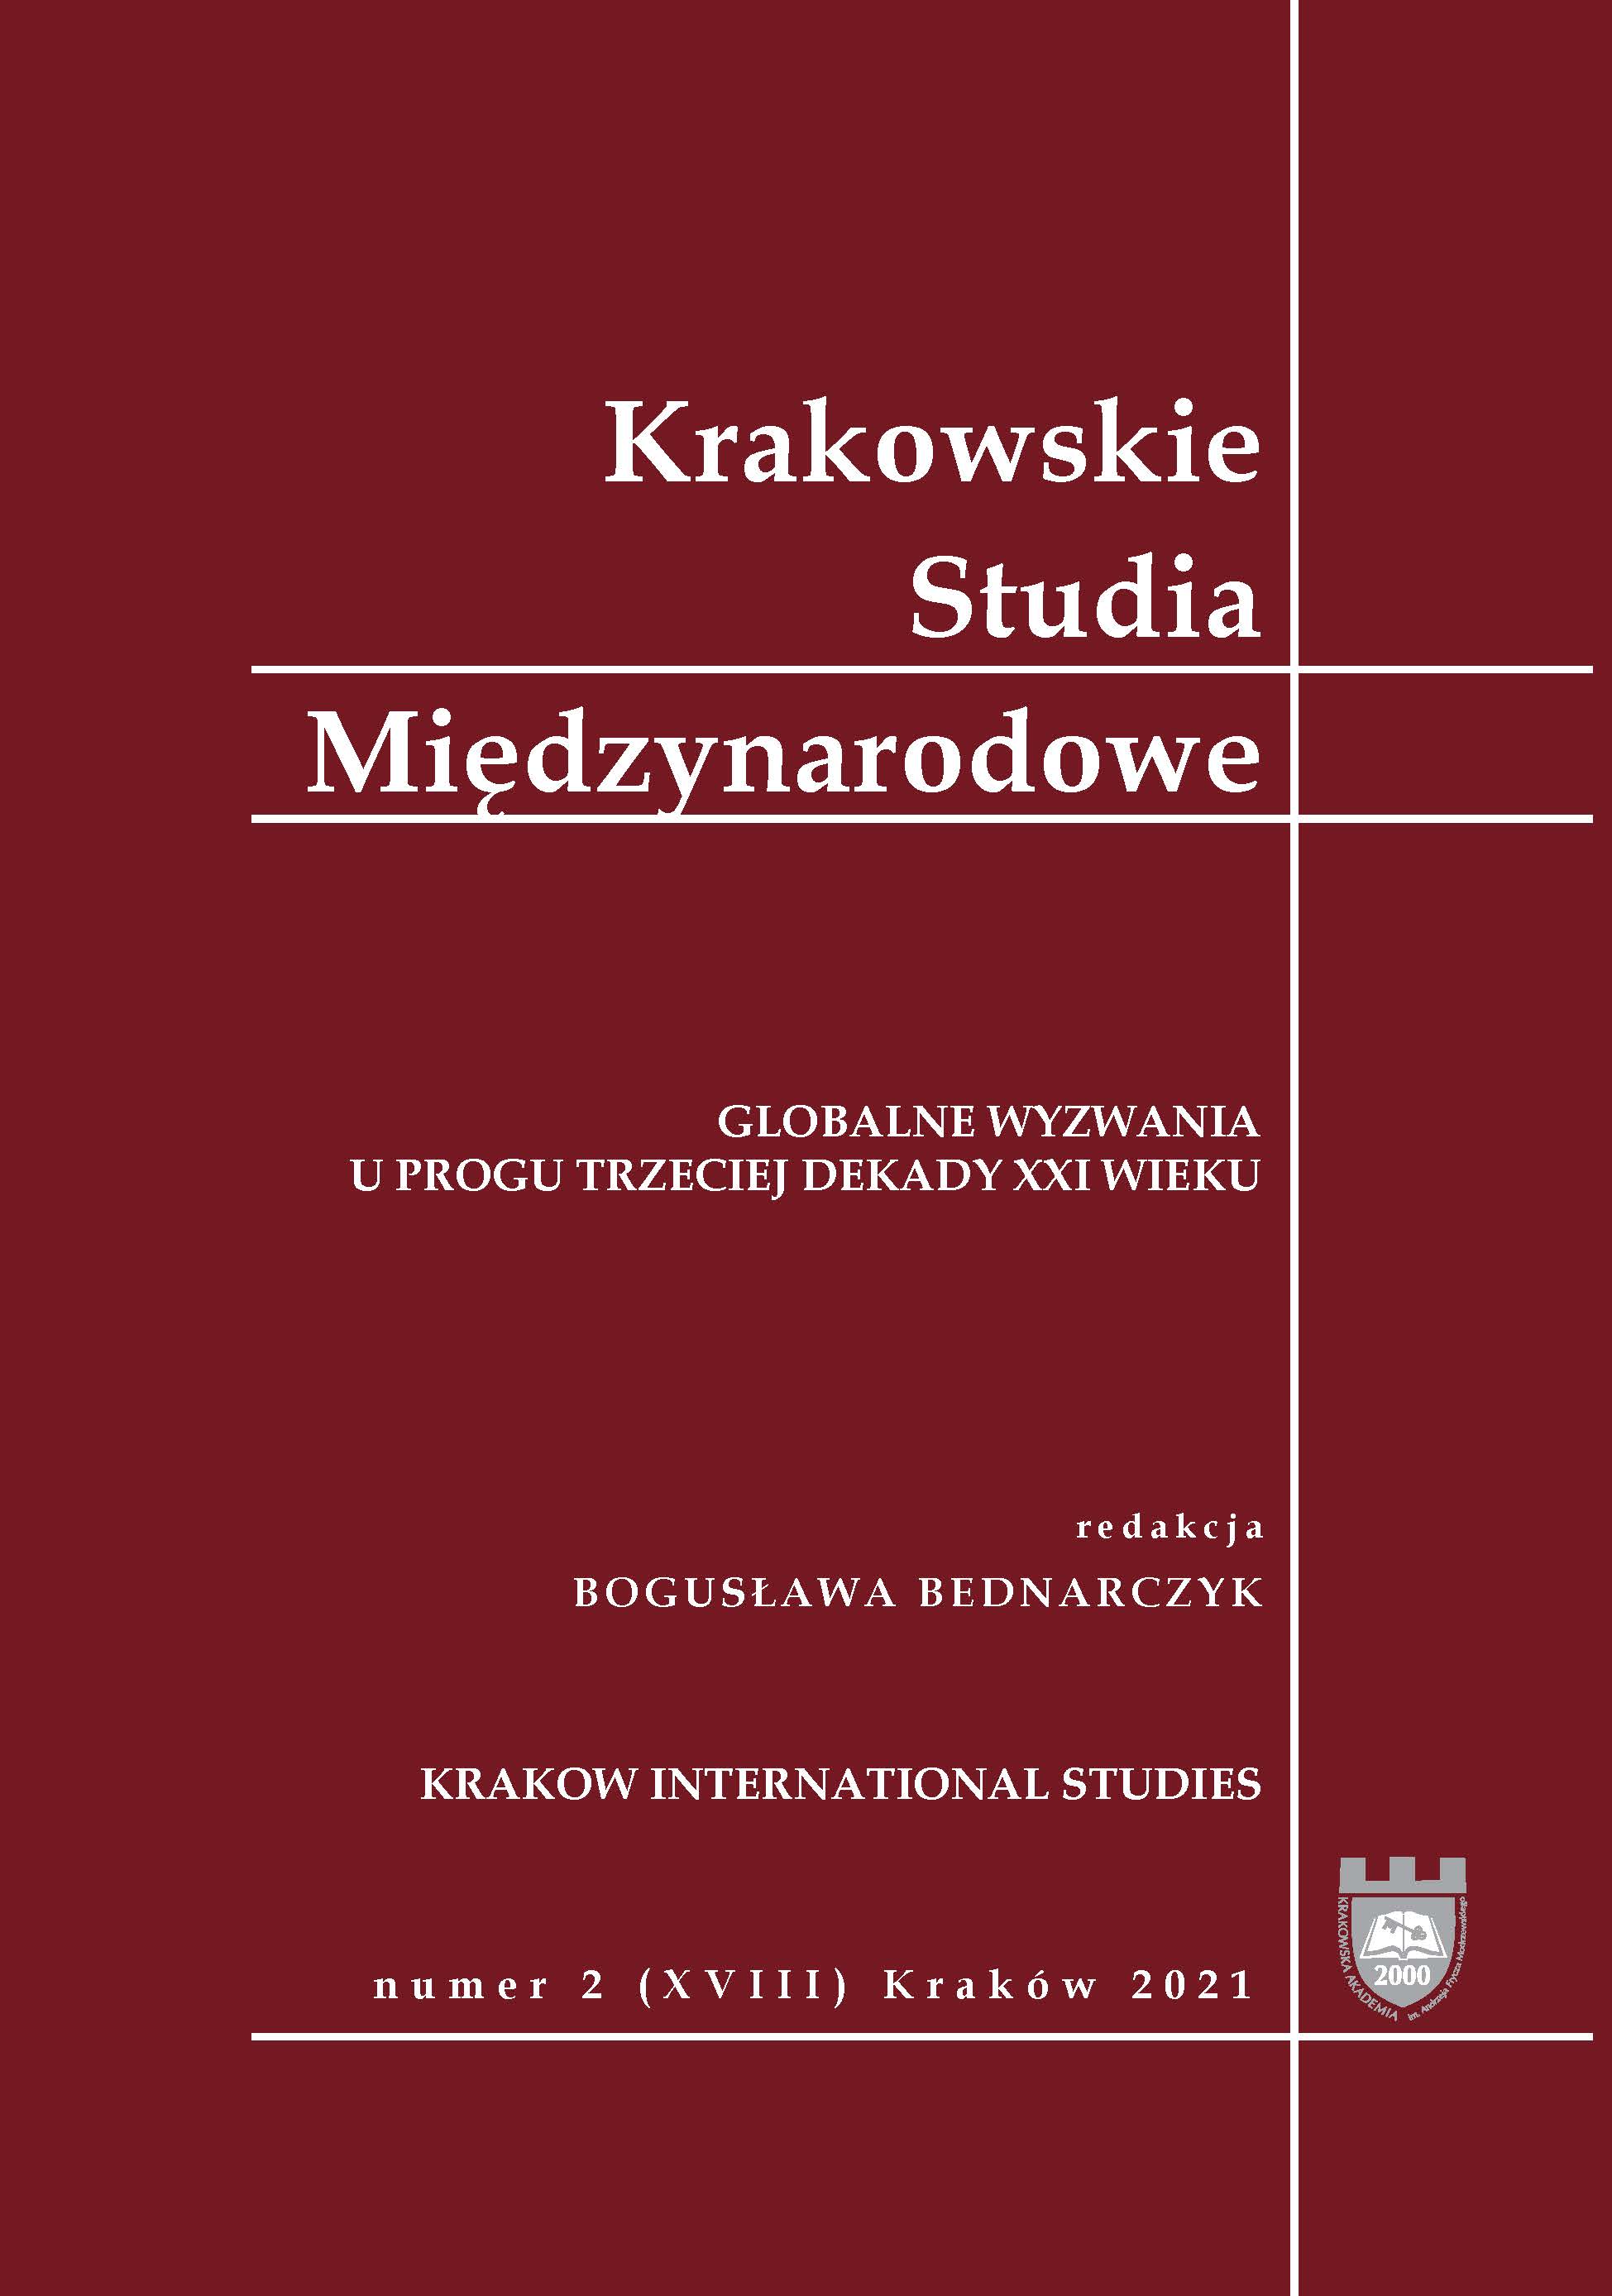 Comparative Arguments in the Legal Debate Over Judiciary Reform in Poland